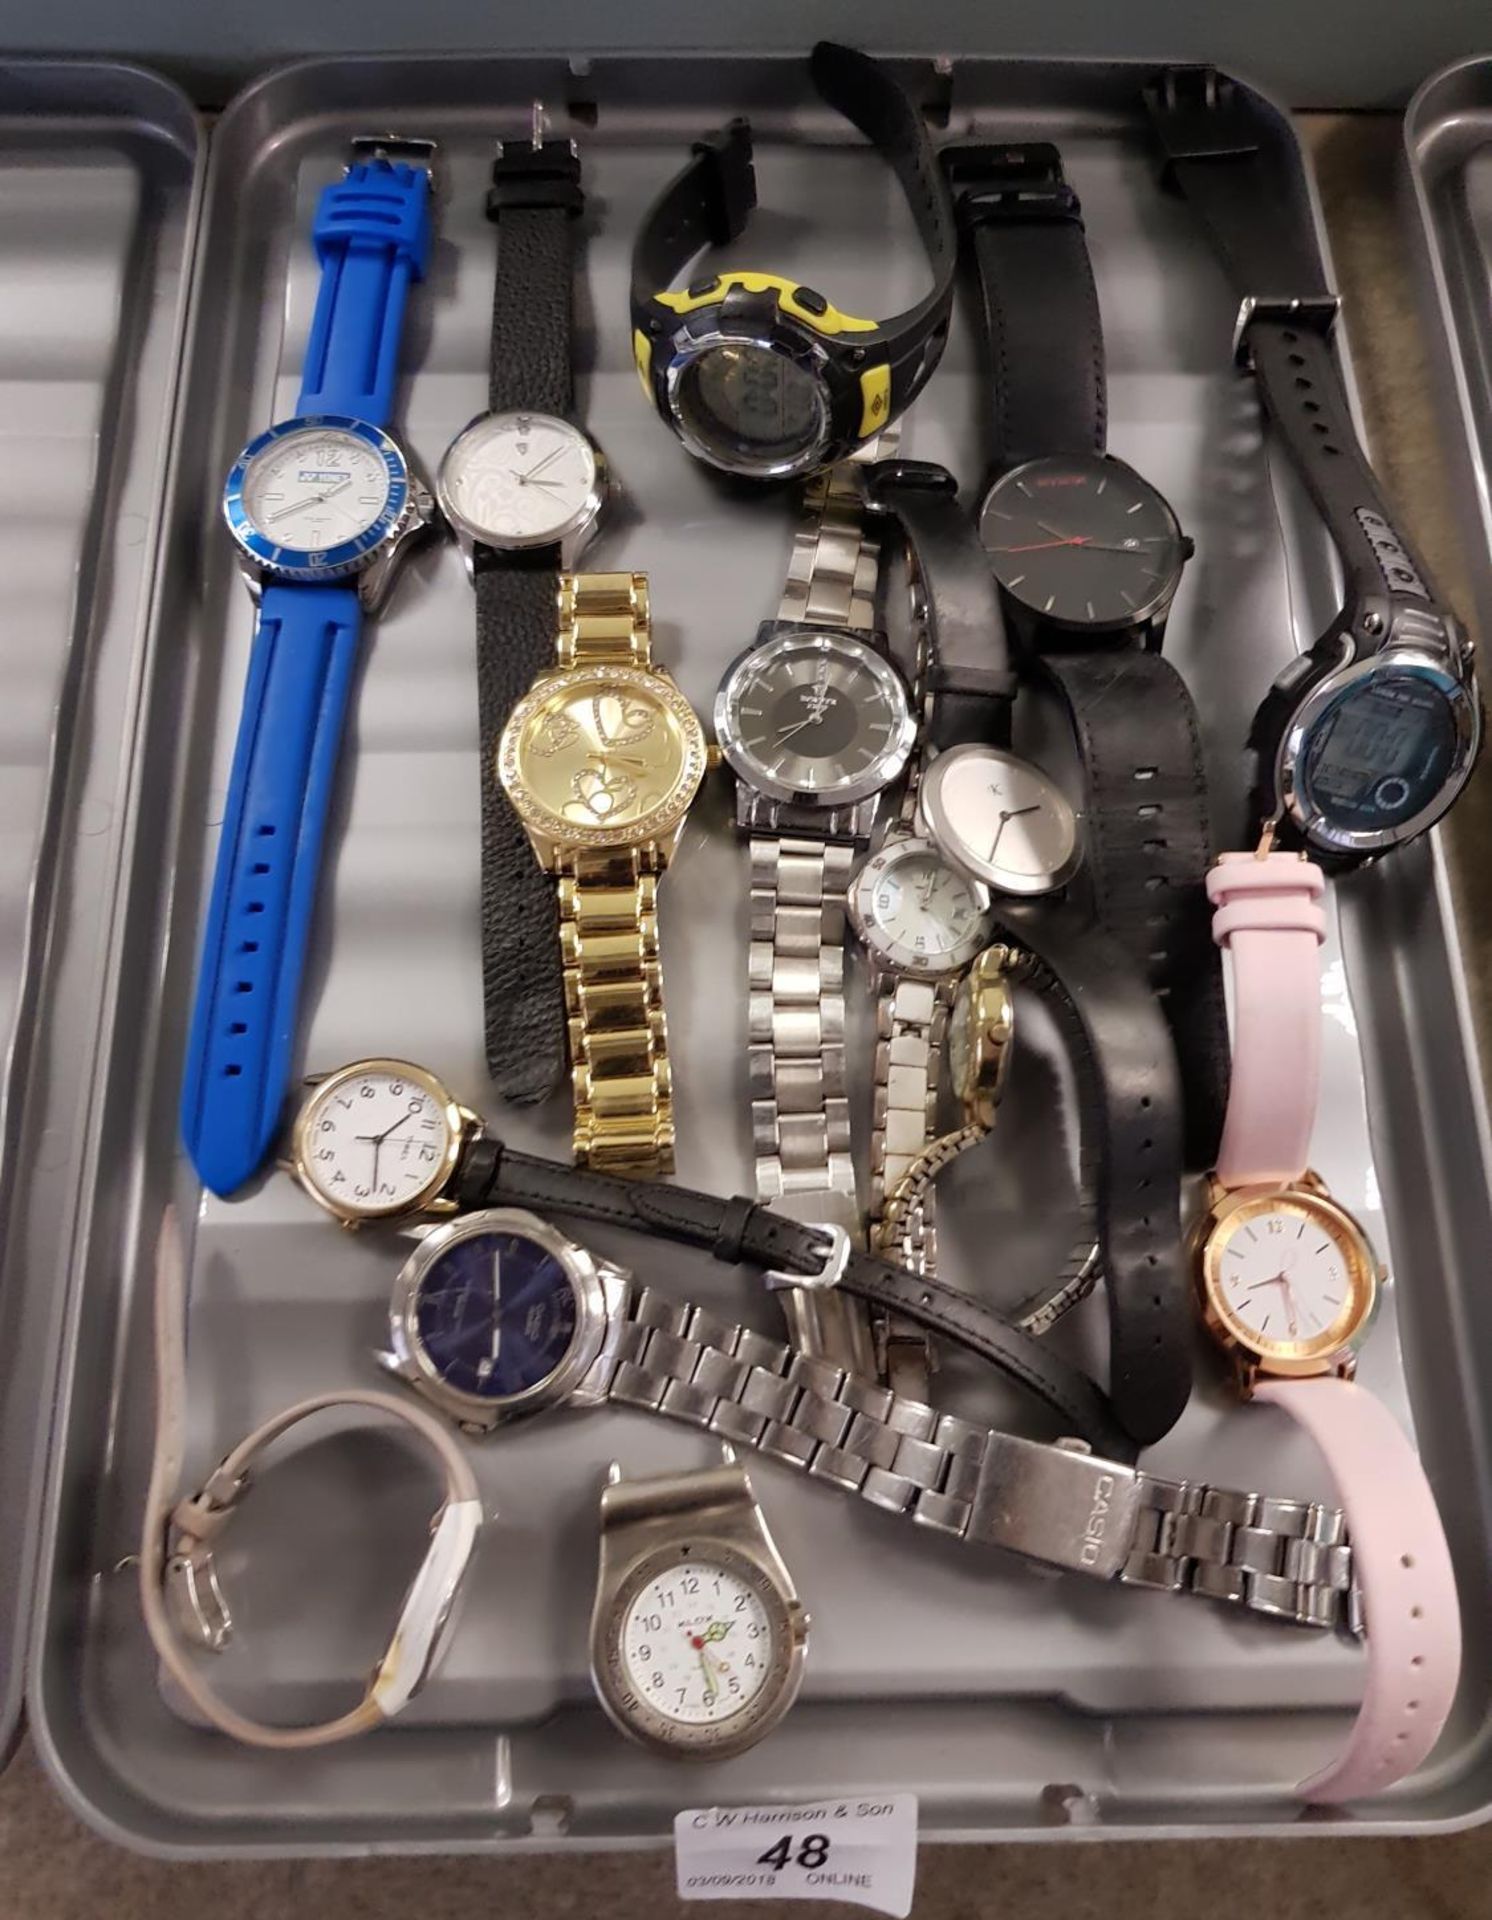 Contents of Tray – (15x) Mixed Watches